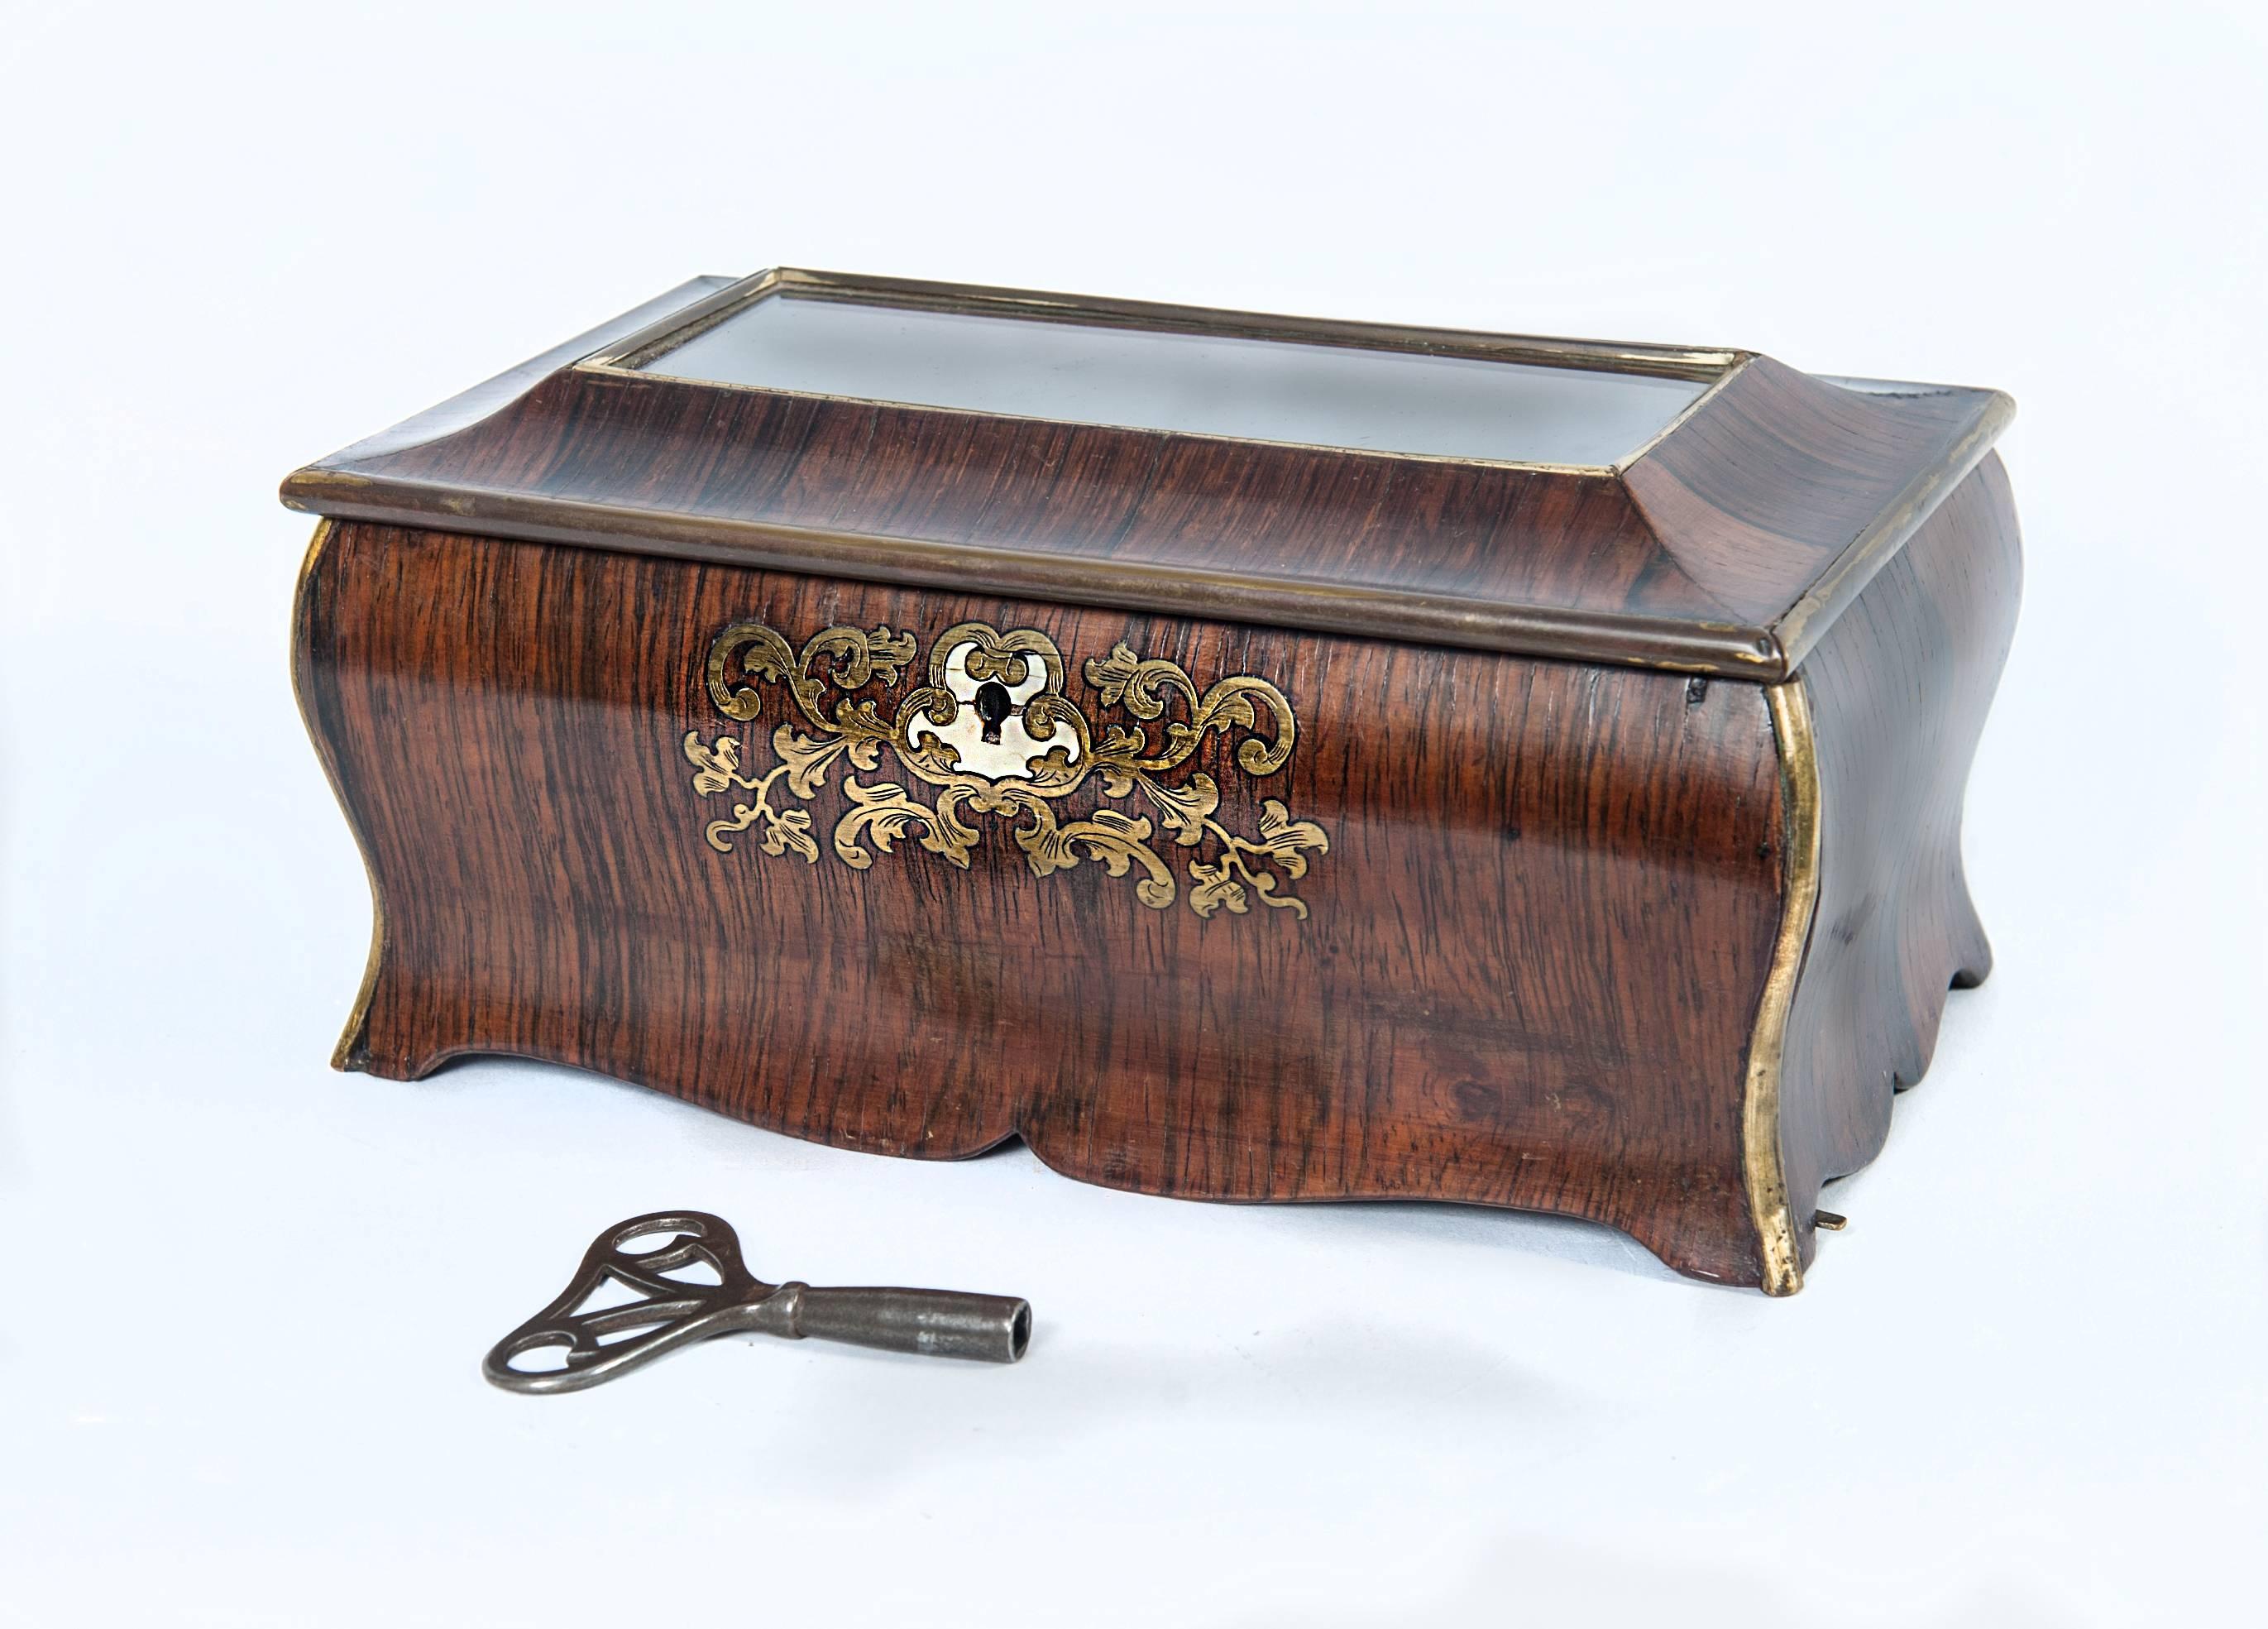 Austrian Functional Mid-19th Century Music Box  For Sale